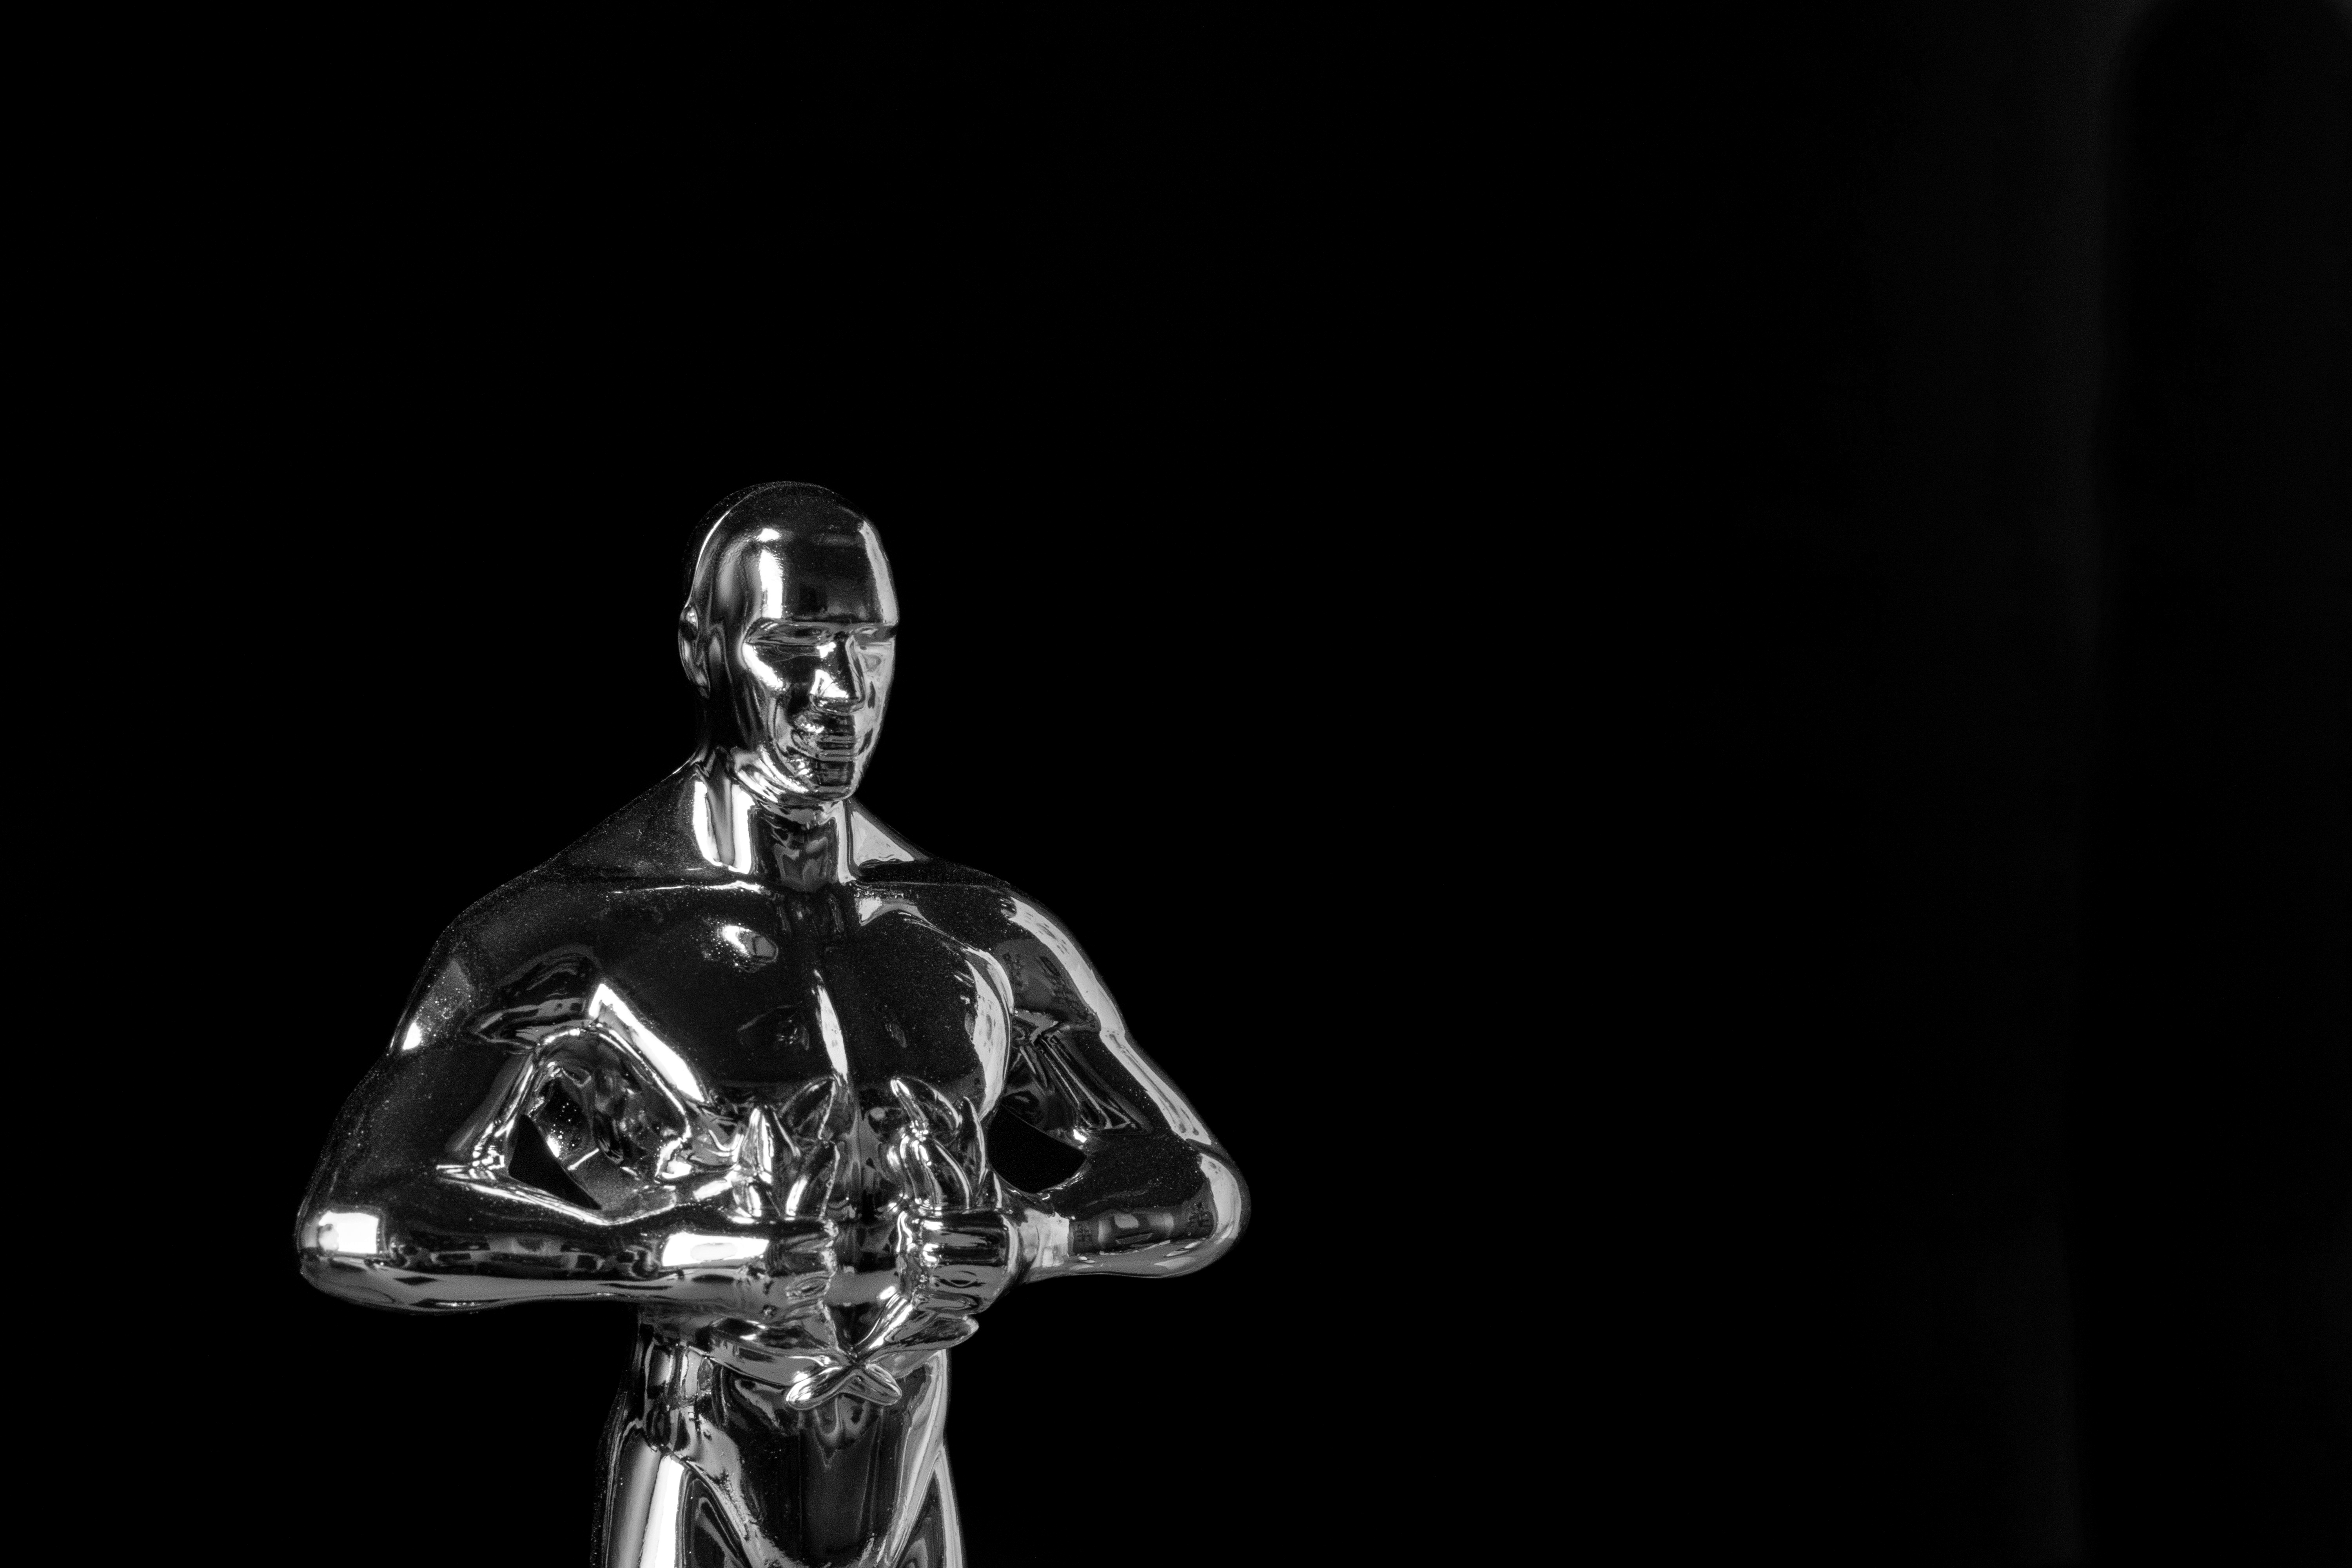 “And the award goes to…”: the online presence of the Oscars best-picture nominees